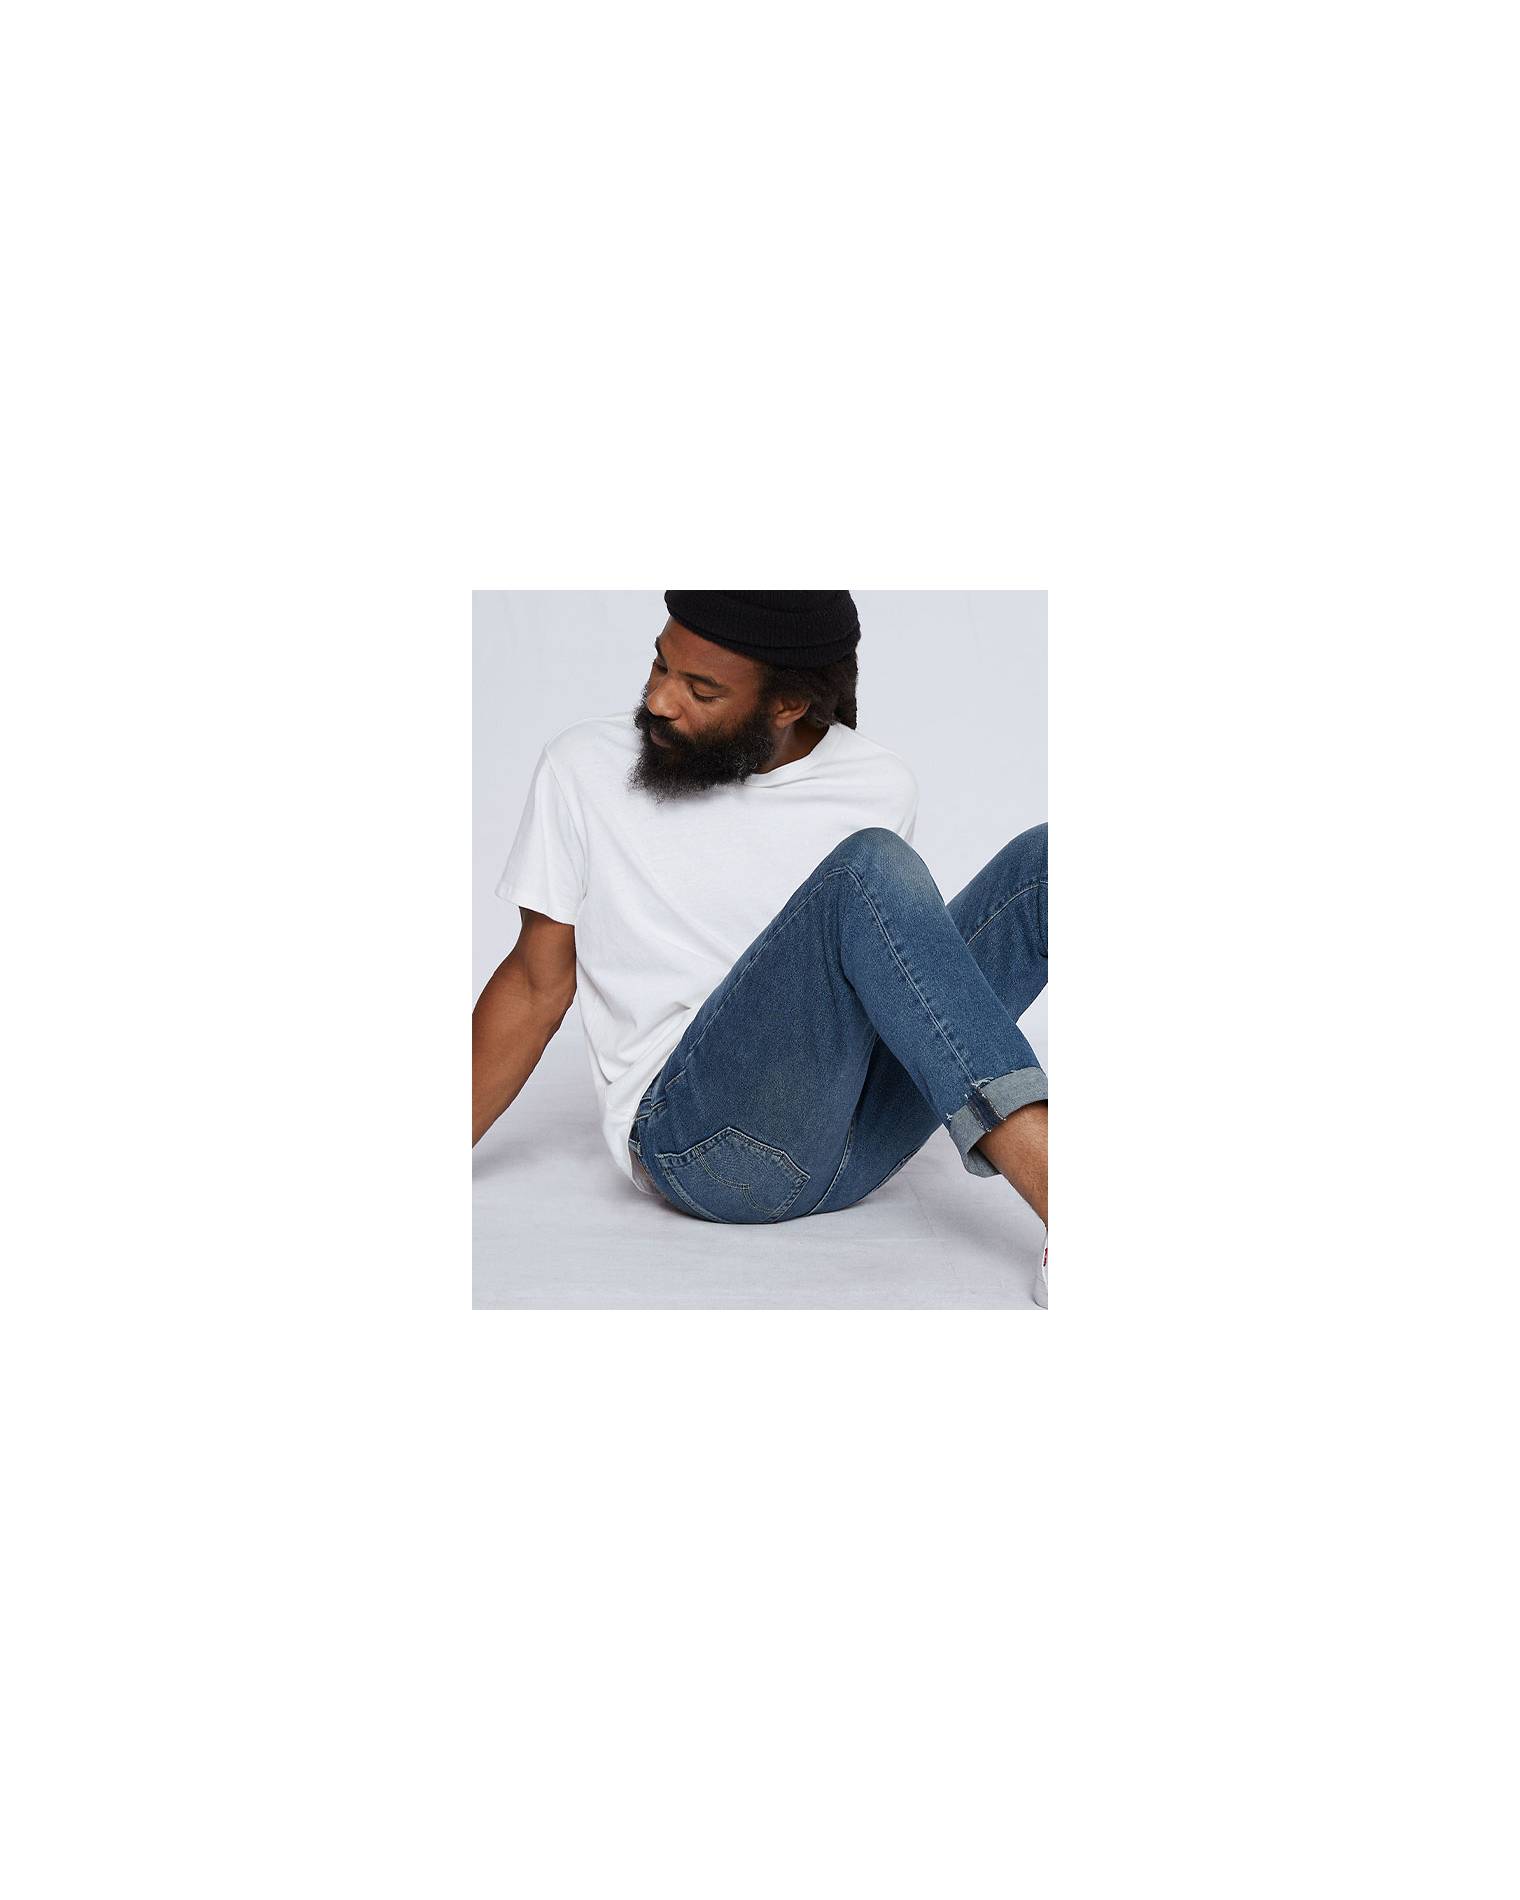 man posing on ground in jeans